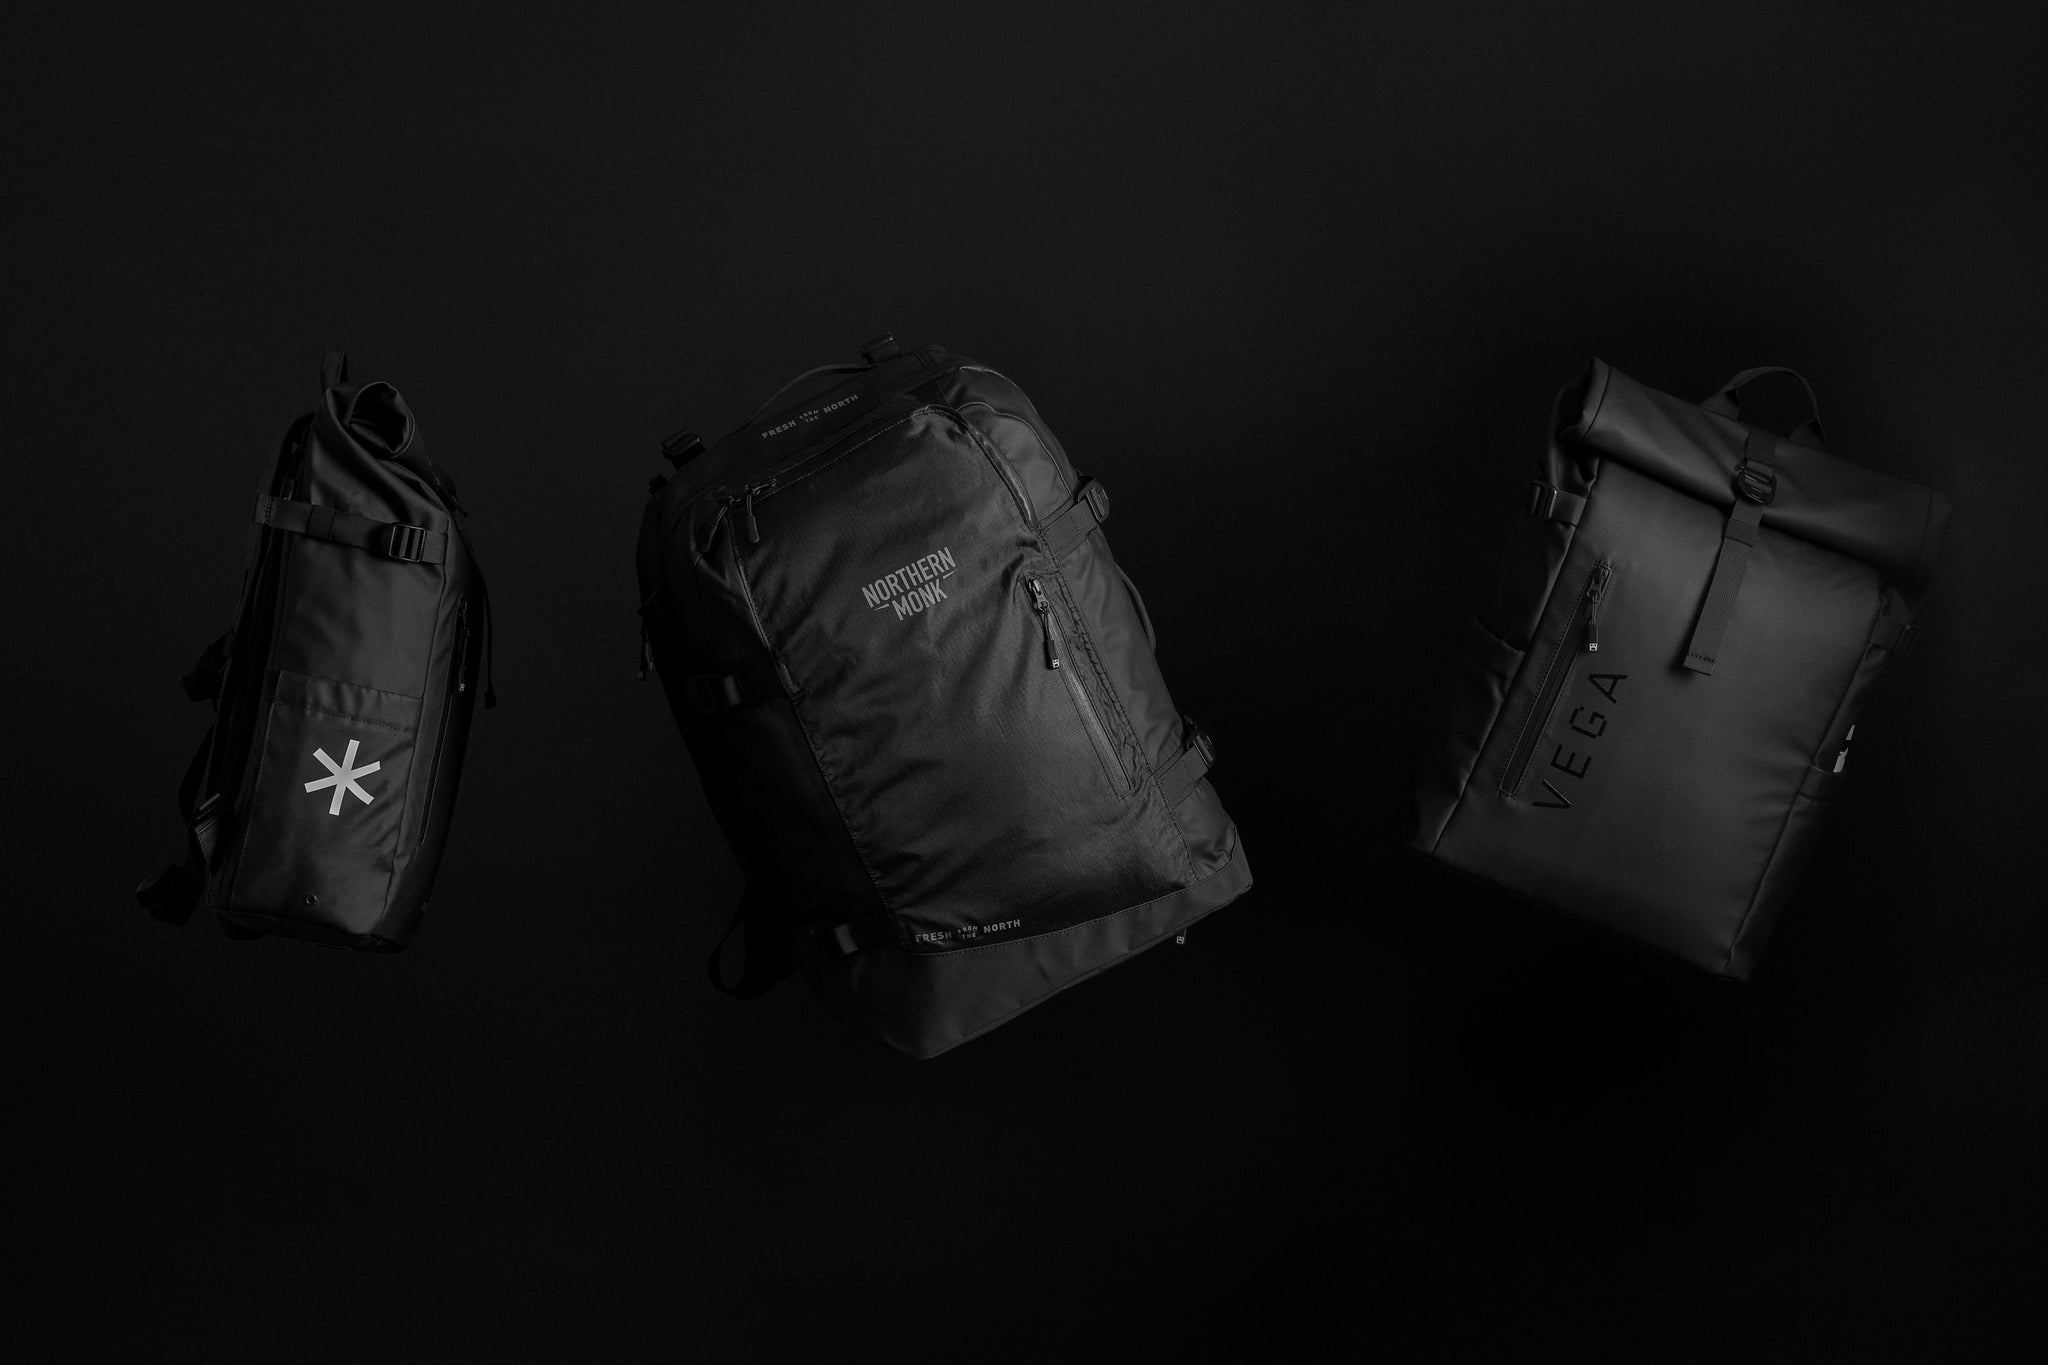 Black backpacks with Co Branded logos